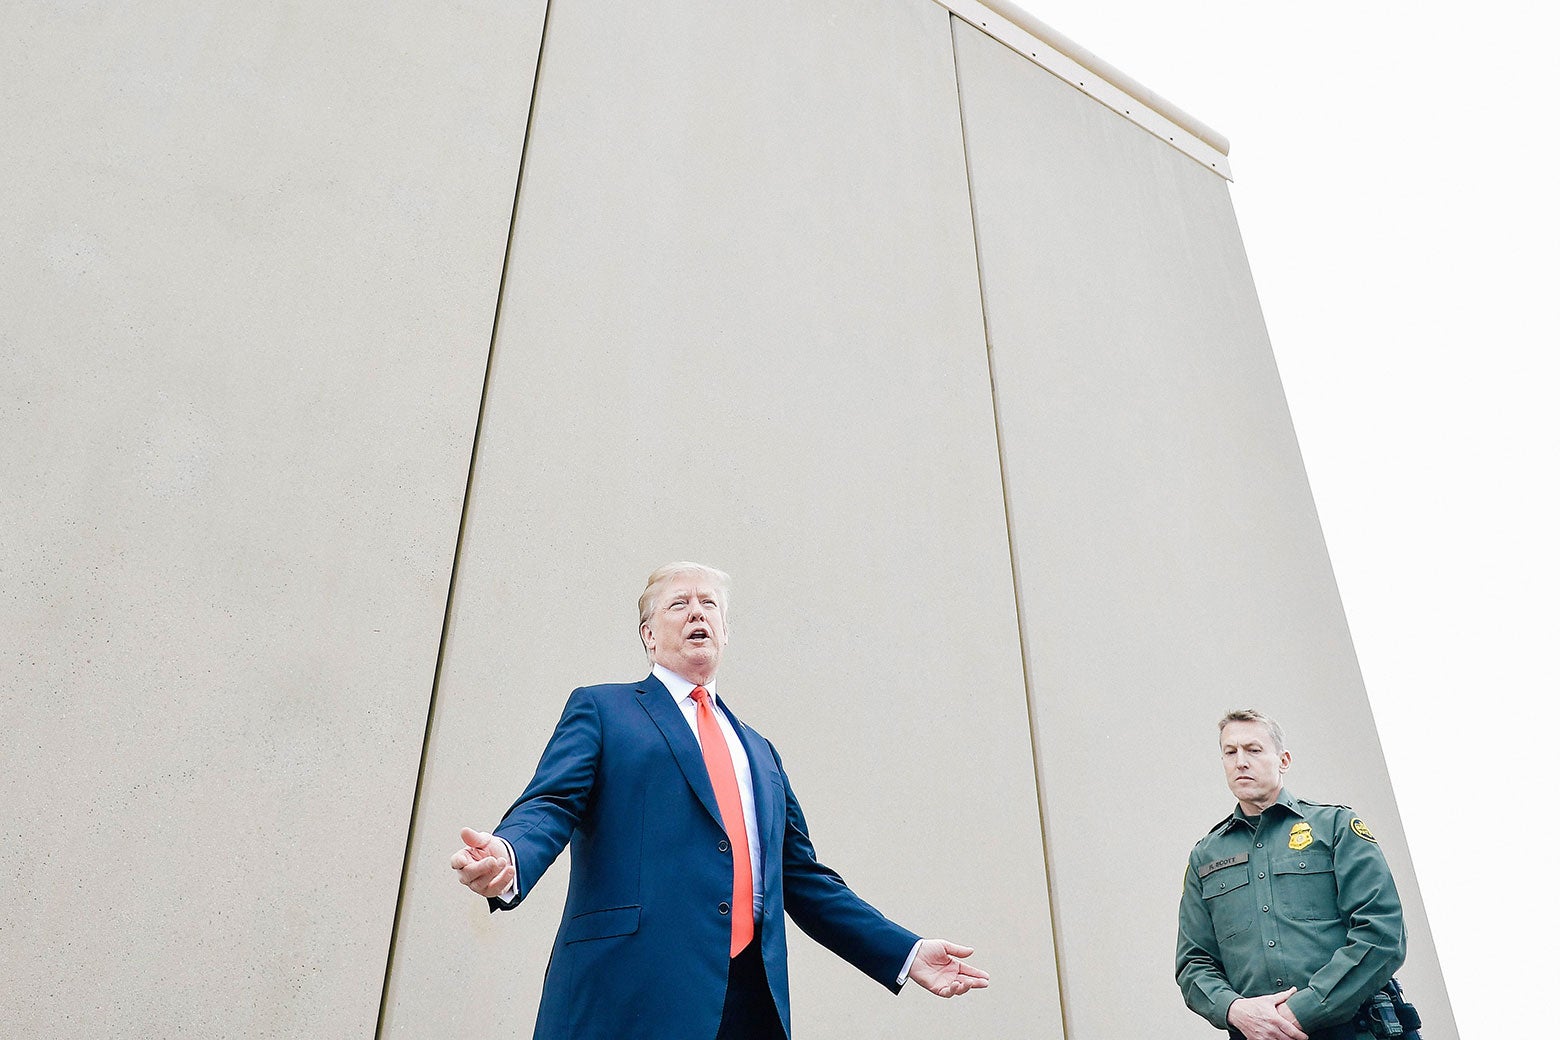 President Donald Trump inspects border wall prototypes with Chief Patrol Agent Rodney S. Scott in San Diego, California, on March 13.